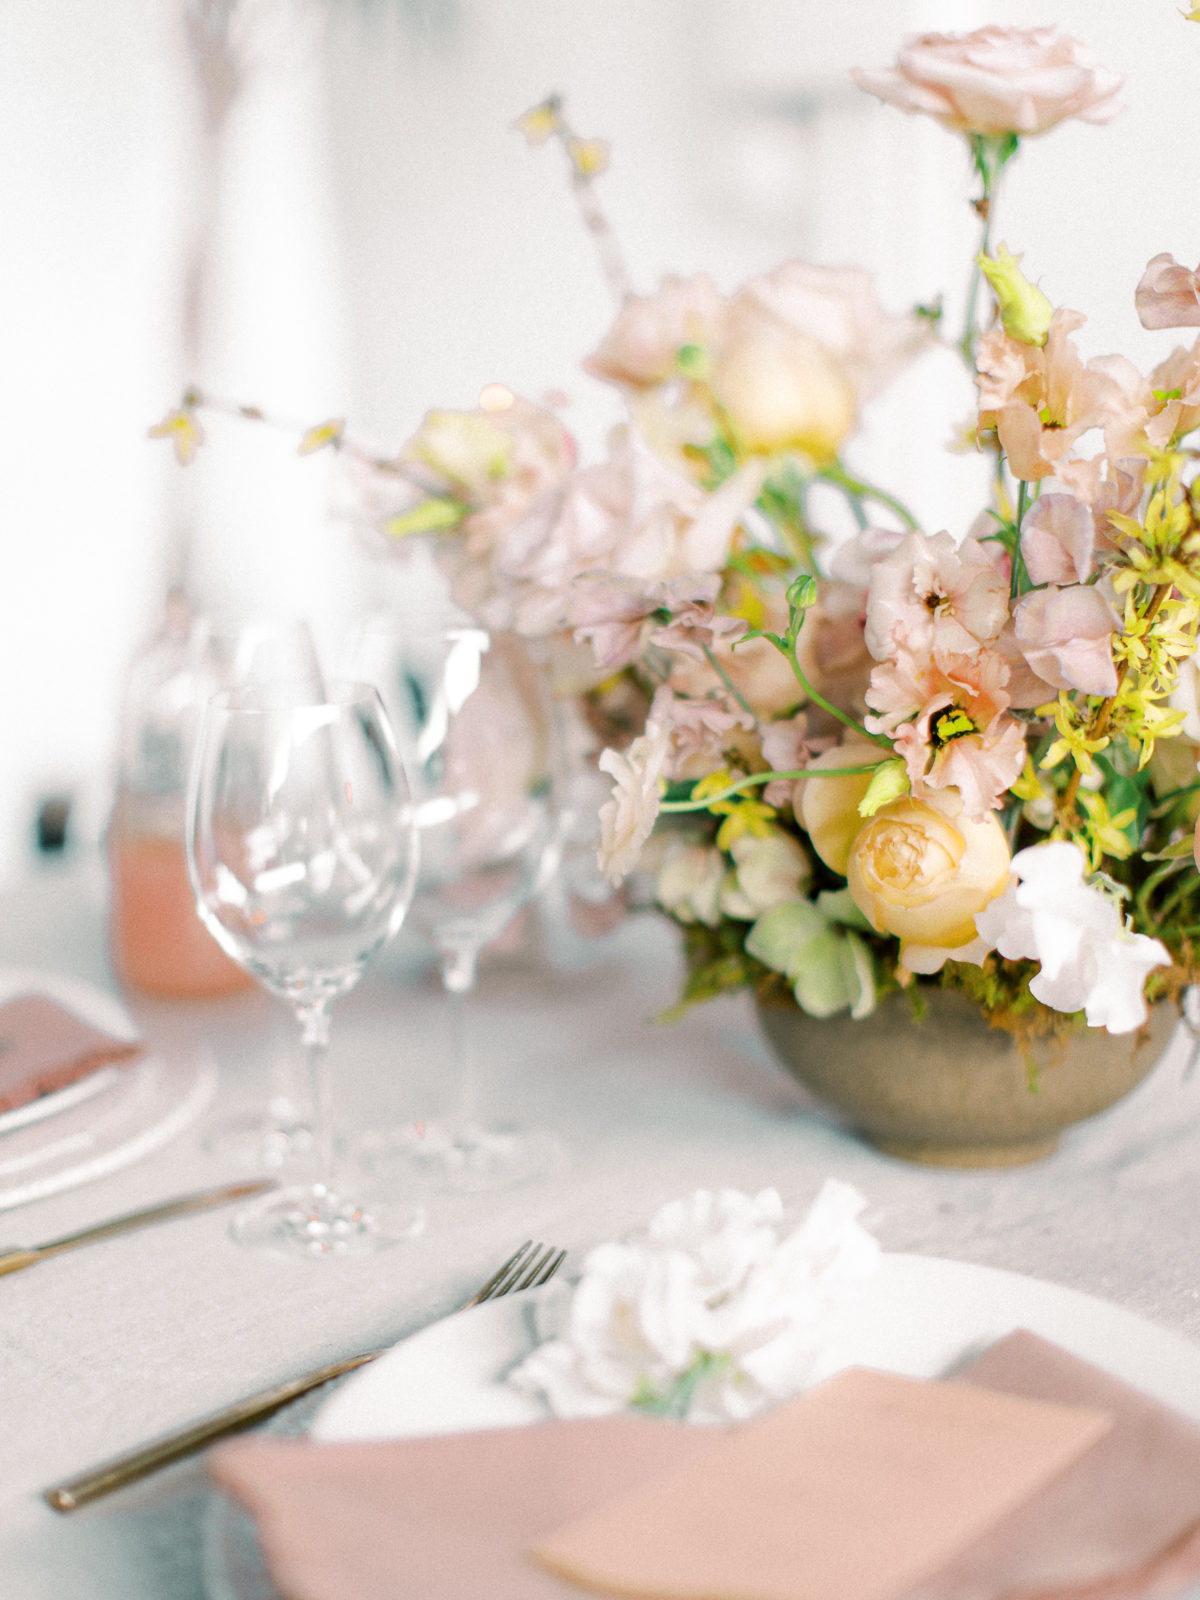 Mauve and peach wedding centerpieces: Whimsical Wedding Inspiration at The Place at Tyler from The Bridal Masterclass featured on Alexa Kay Events